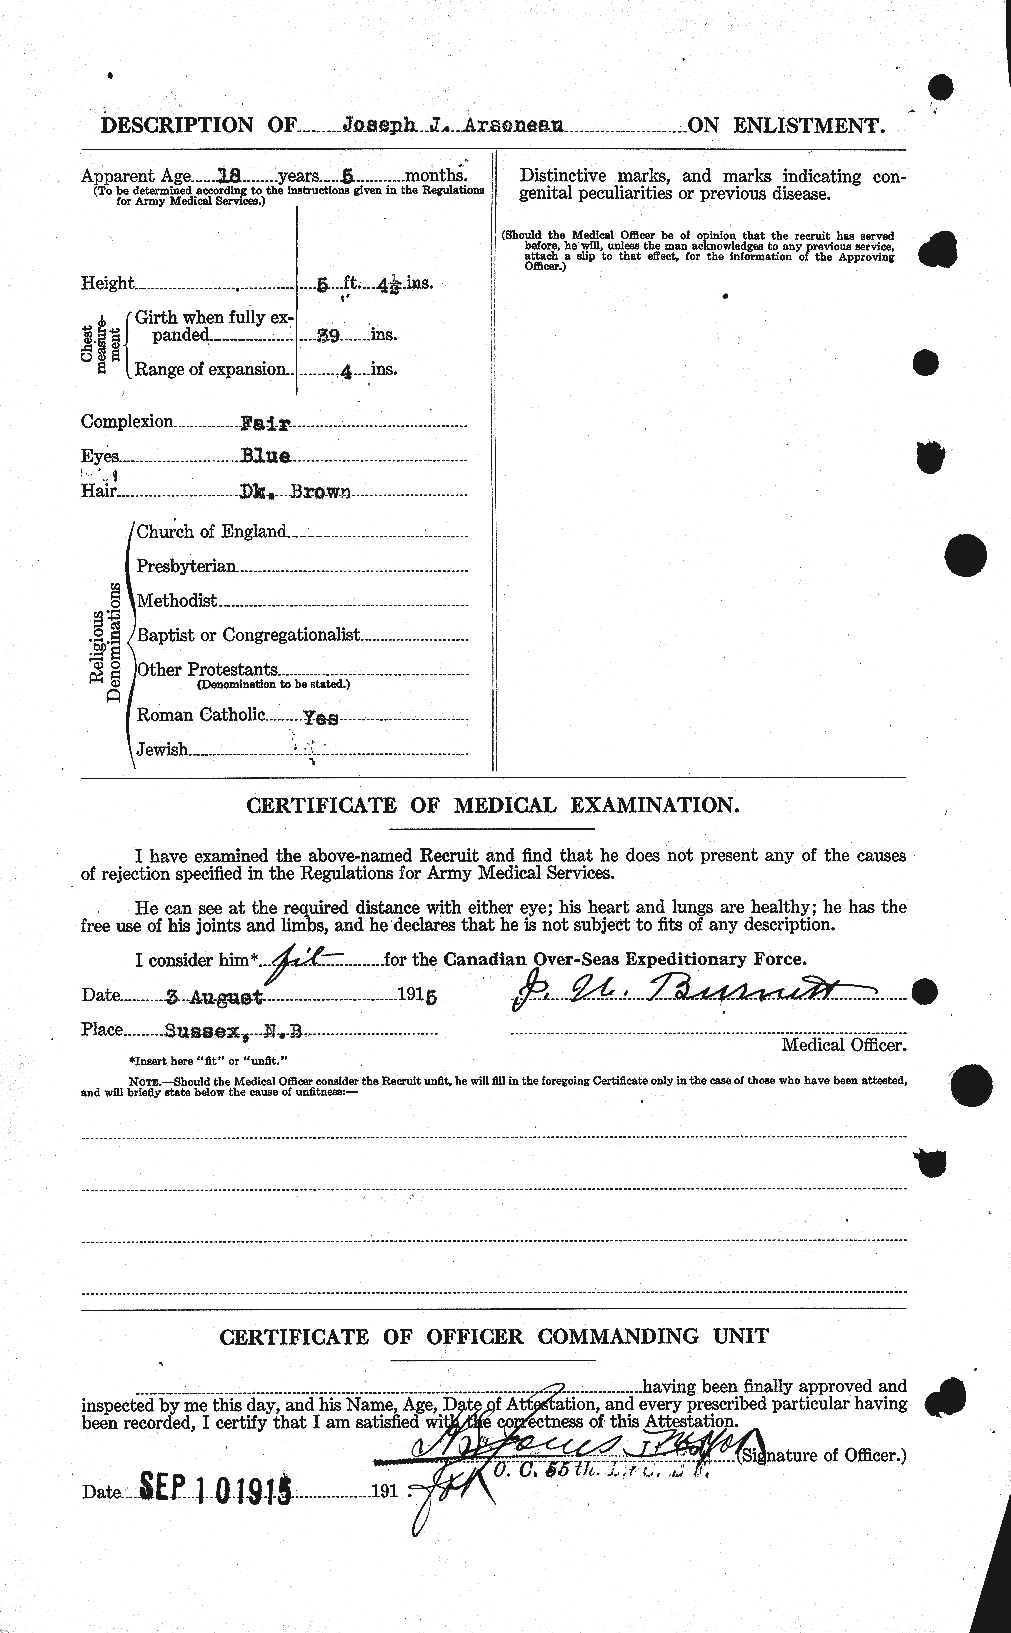 Personnel Records of the First World War - CEF 214950b